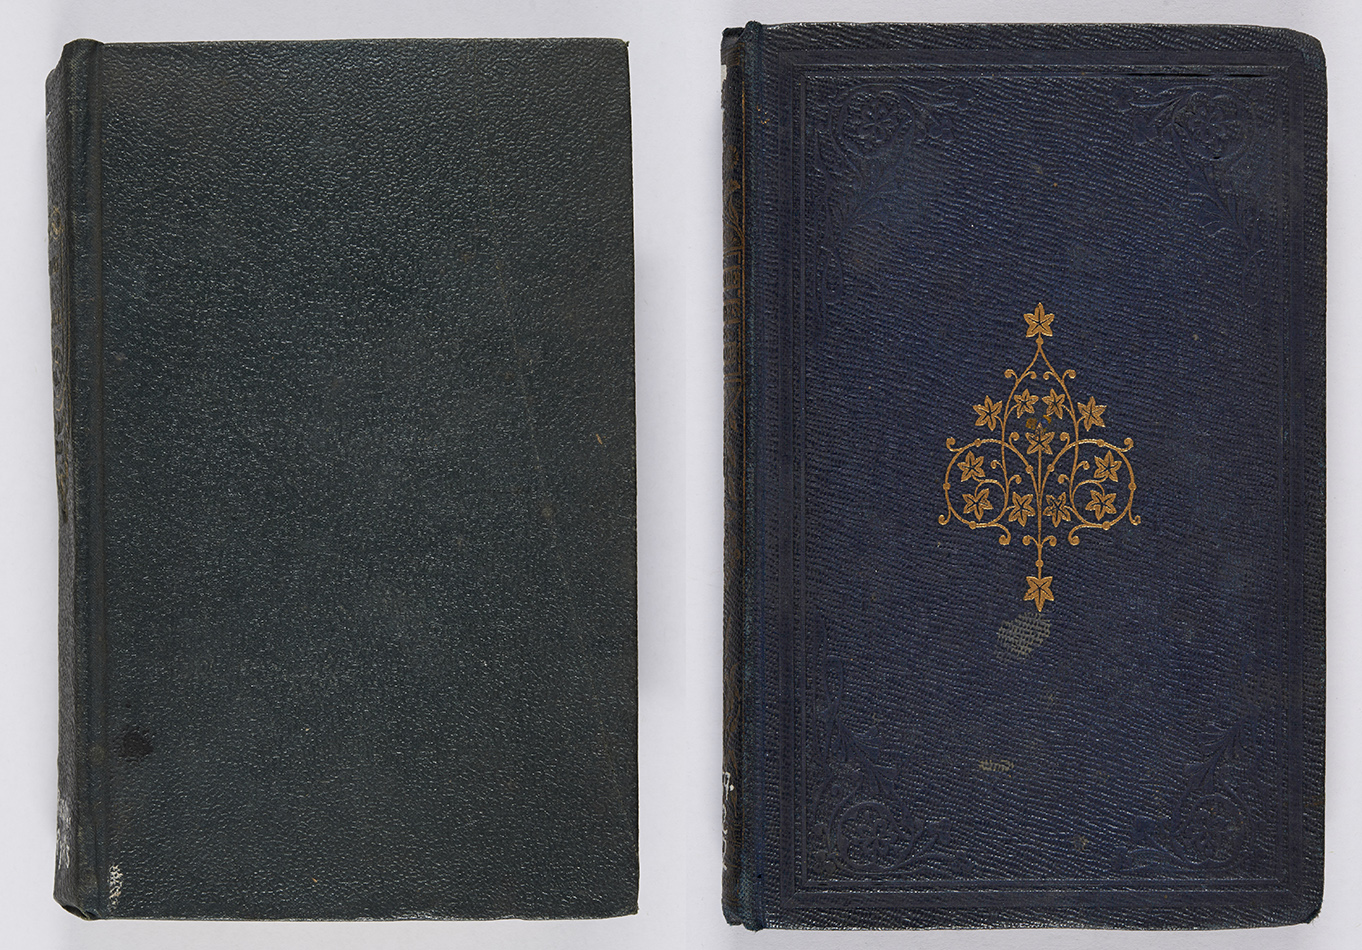 Examples of morocco grain, the first a dark green morocco, the second a dark blue ribbed-morocco blocked in blind with a central gold motif. James Baillie Fraser, Tales of the caravanserai (London: Smith, Elder and Co., 1833), s PR1312.R7R5 ; Alexander Laing, Wayside flowers (Glasgow, Edinburgh, and London: Blackie and Son, 1857), r PR4859.L32W2.